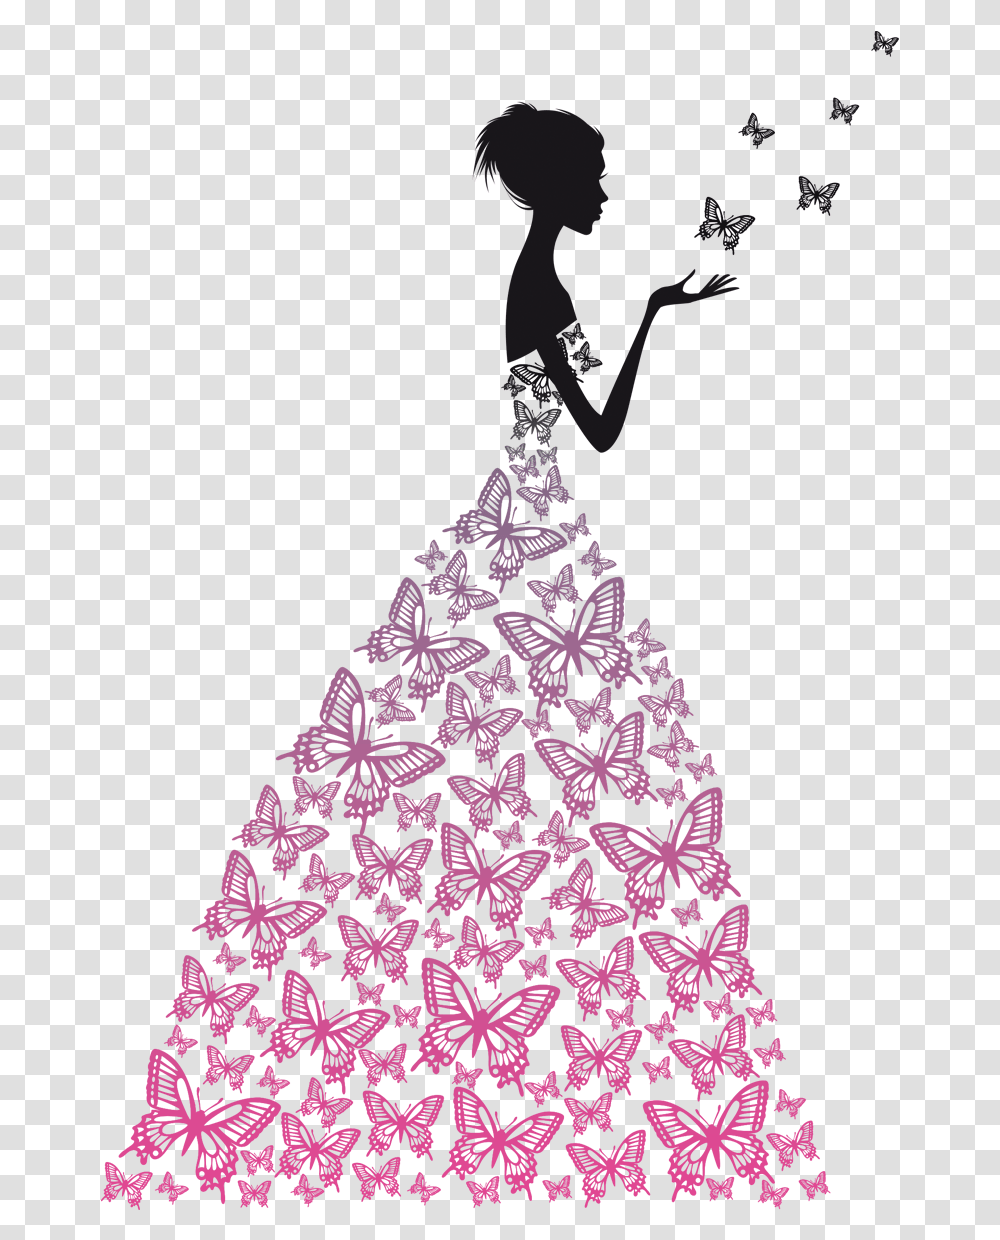 Download Butterfly Silhouette Photography Figures Dress, Ornament, Tree, Plant, Accessories Transparent Png